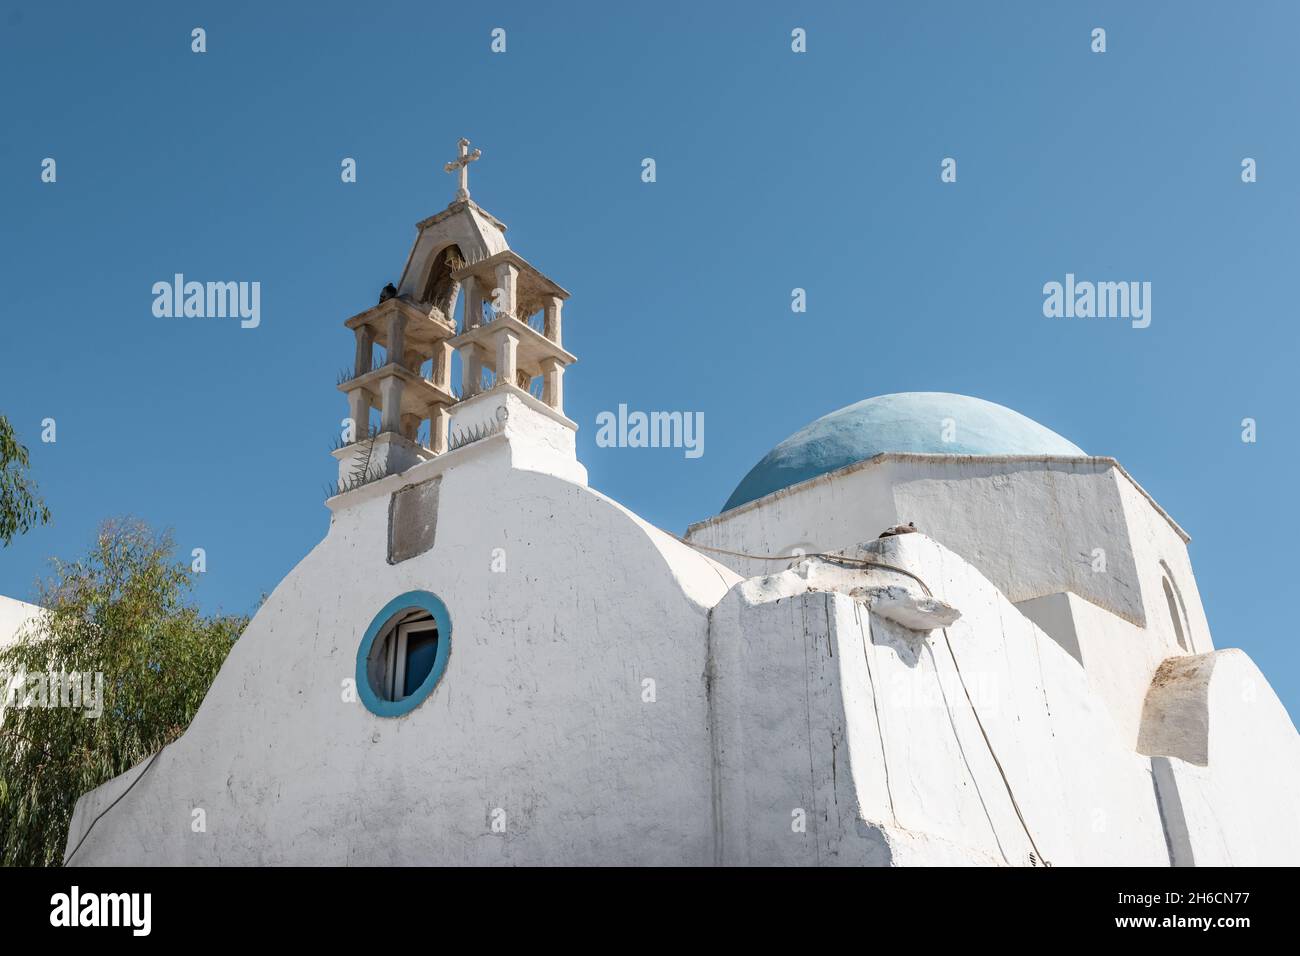 Greek whitewashed church with blue dome. Stock Photo